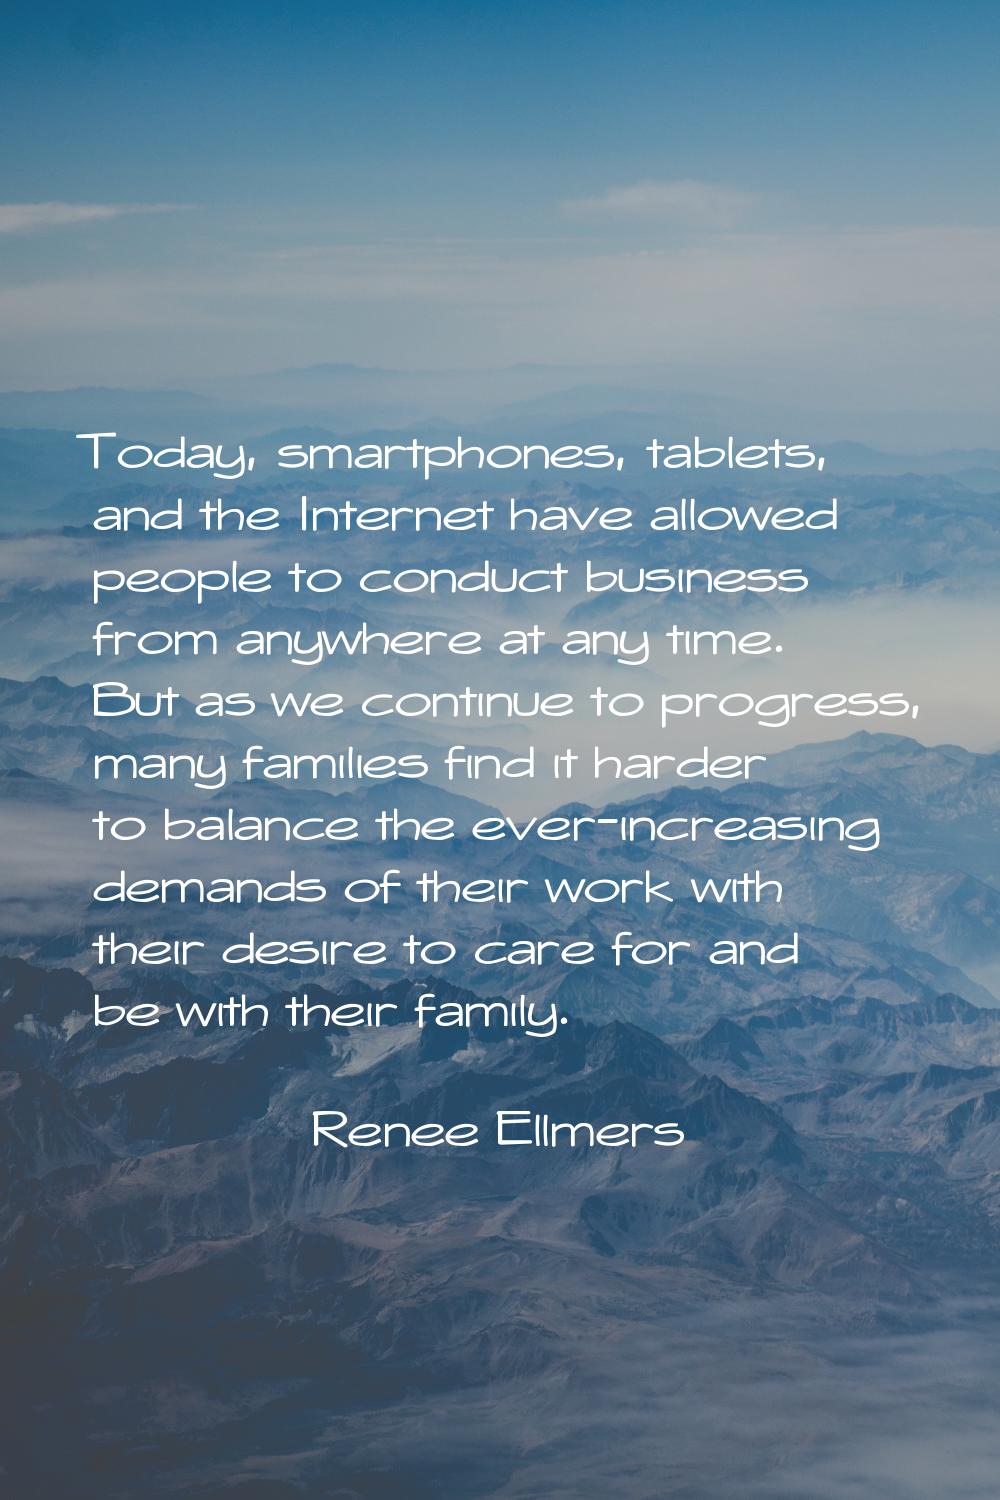 Today, smartphones, tablets, and the Internet have allowed people to conduct business from anywhere